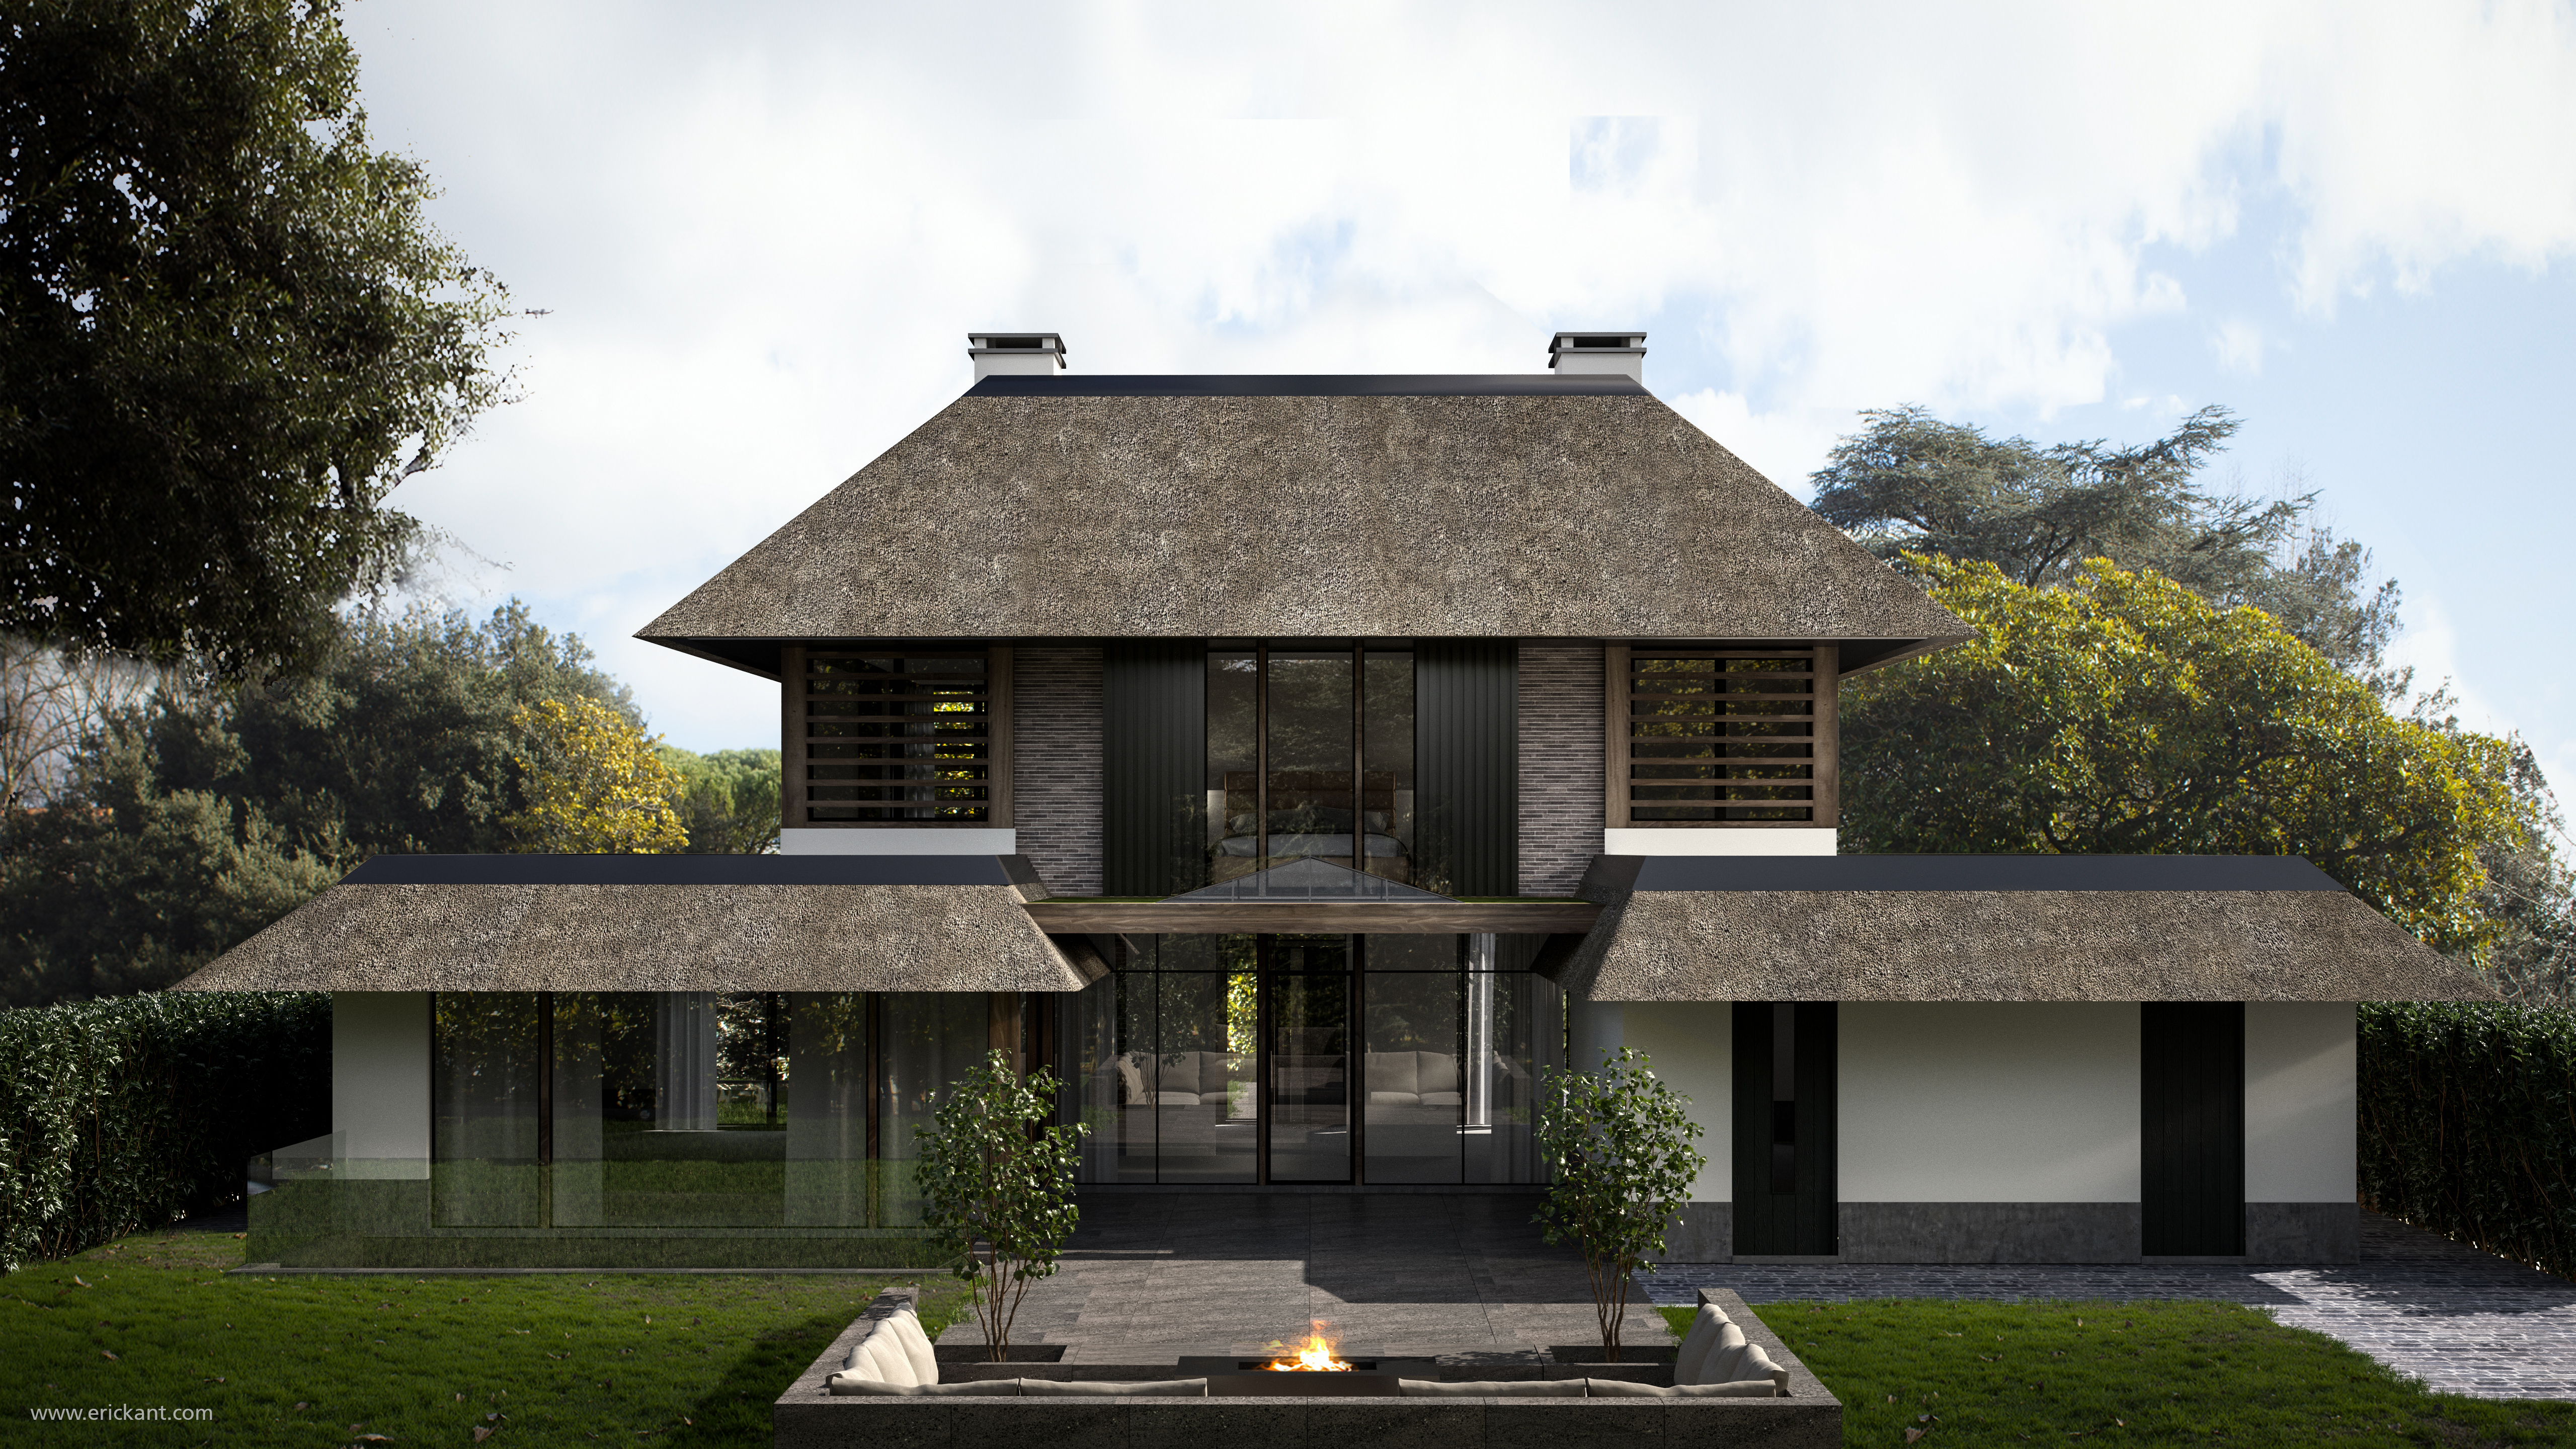 Architecture-Thatch-Roof-Design-Eric-Kant.jpg